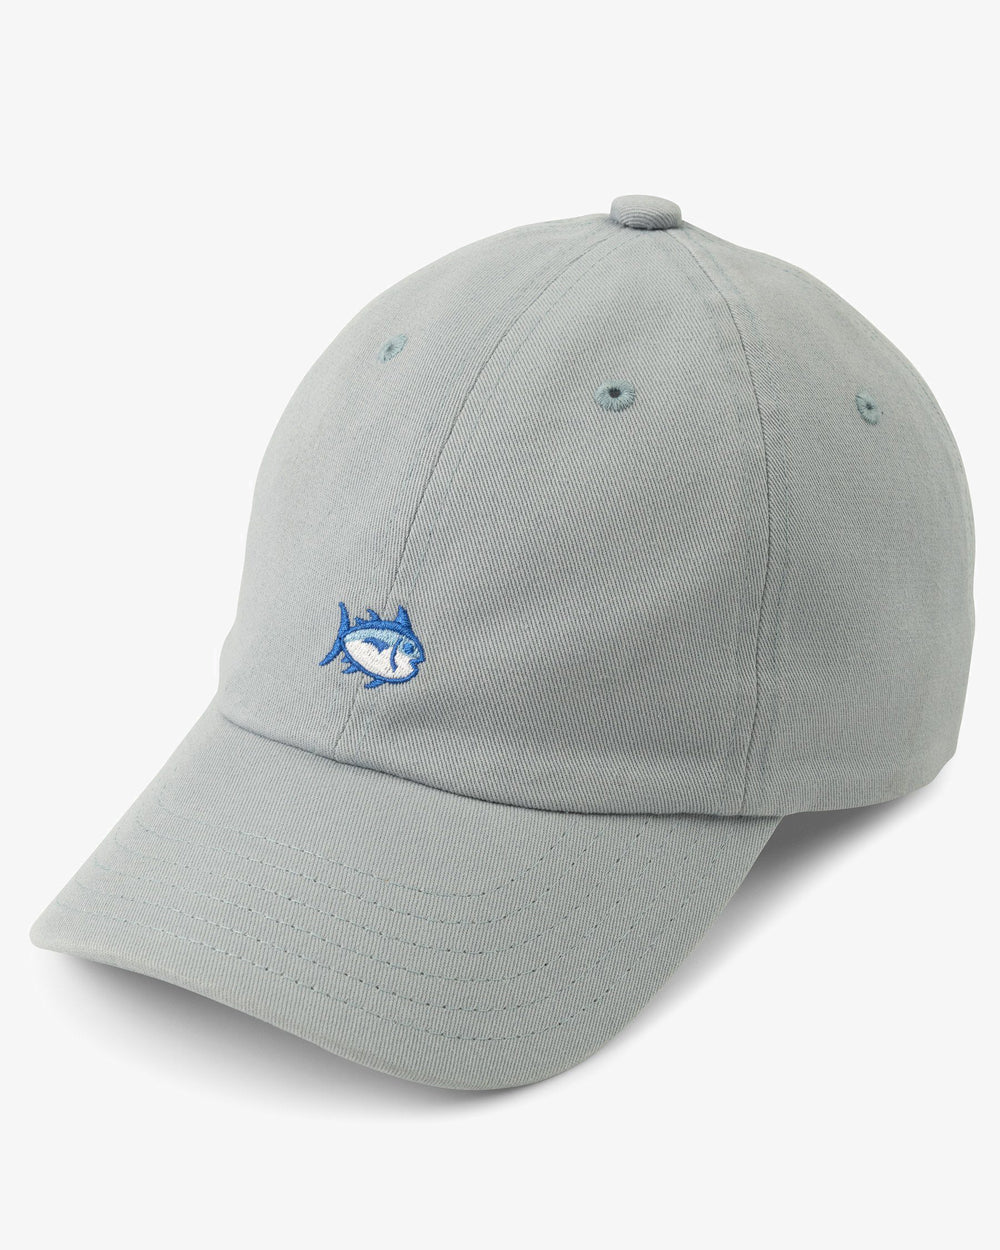 The front view of the Kid's Mini Skipjack Hat by Southern Tide - Steel Grey